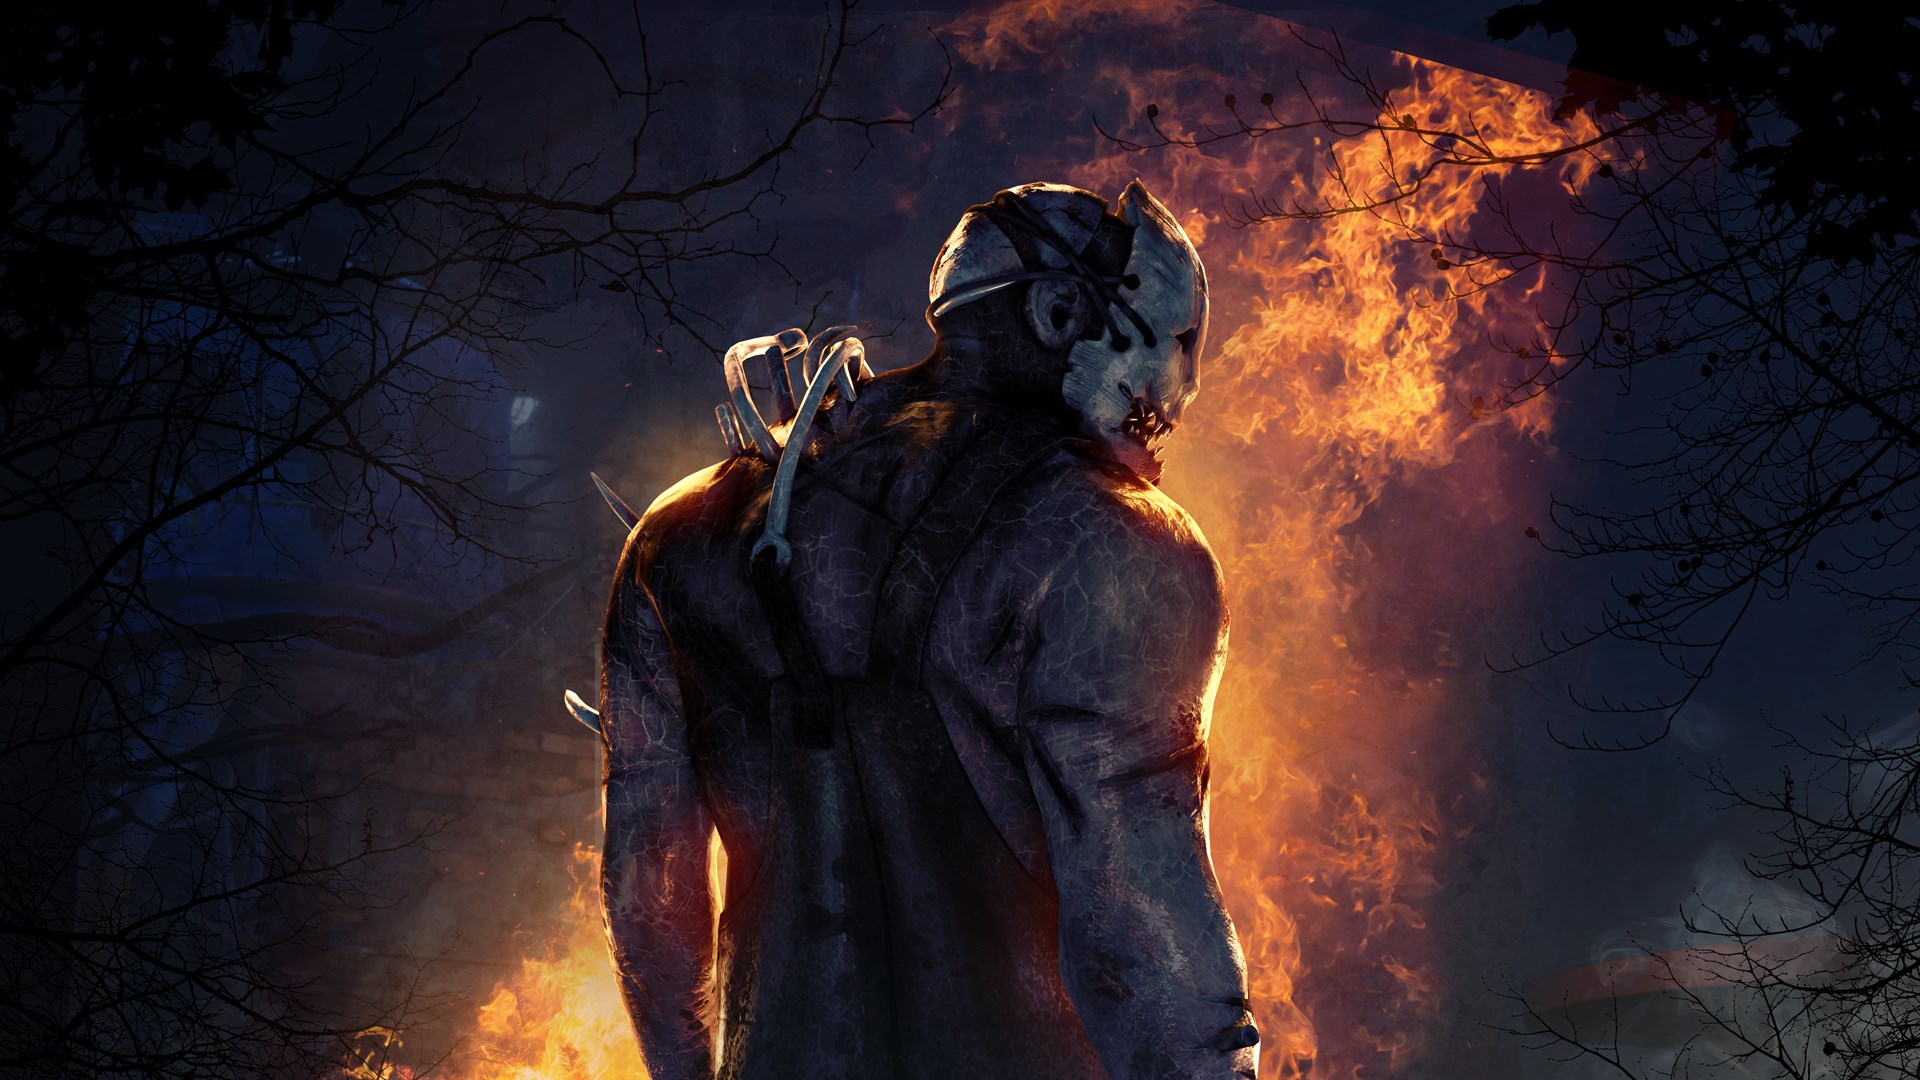 dead by daylight for xbox one